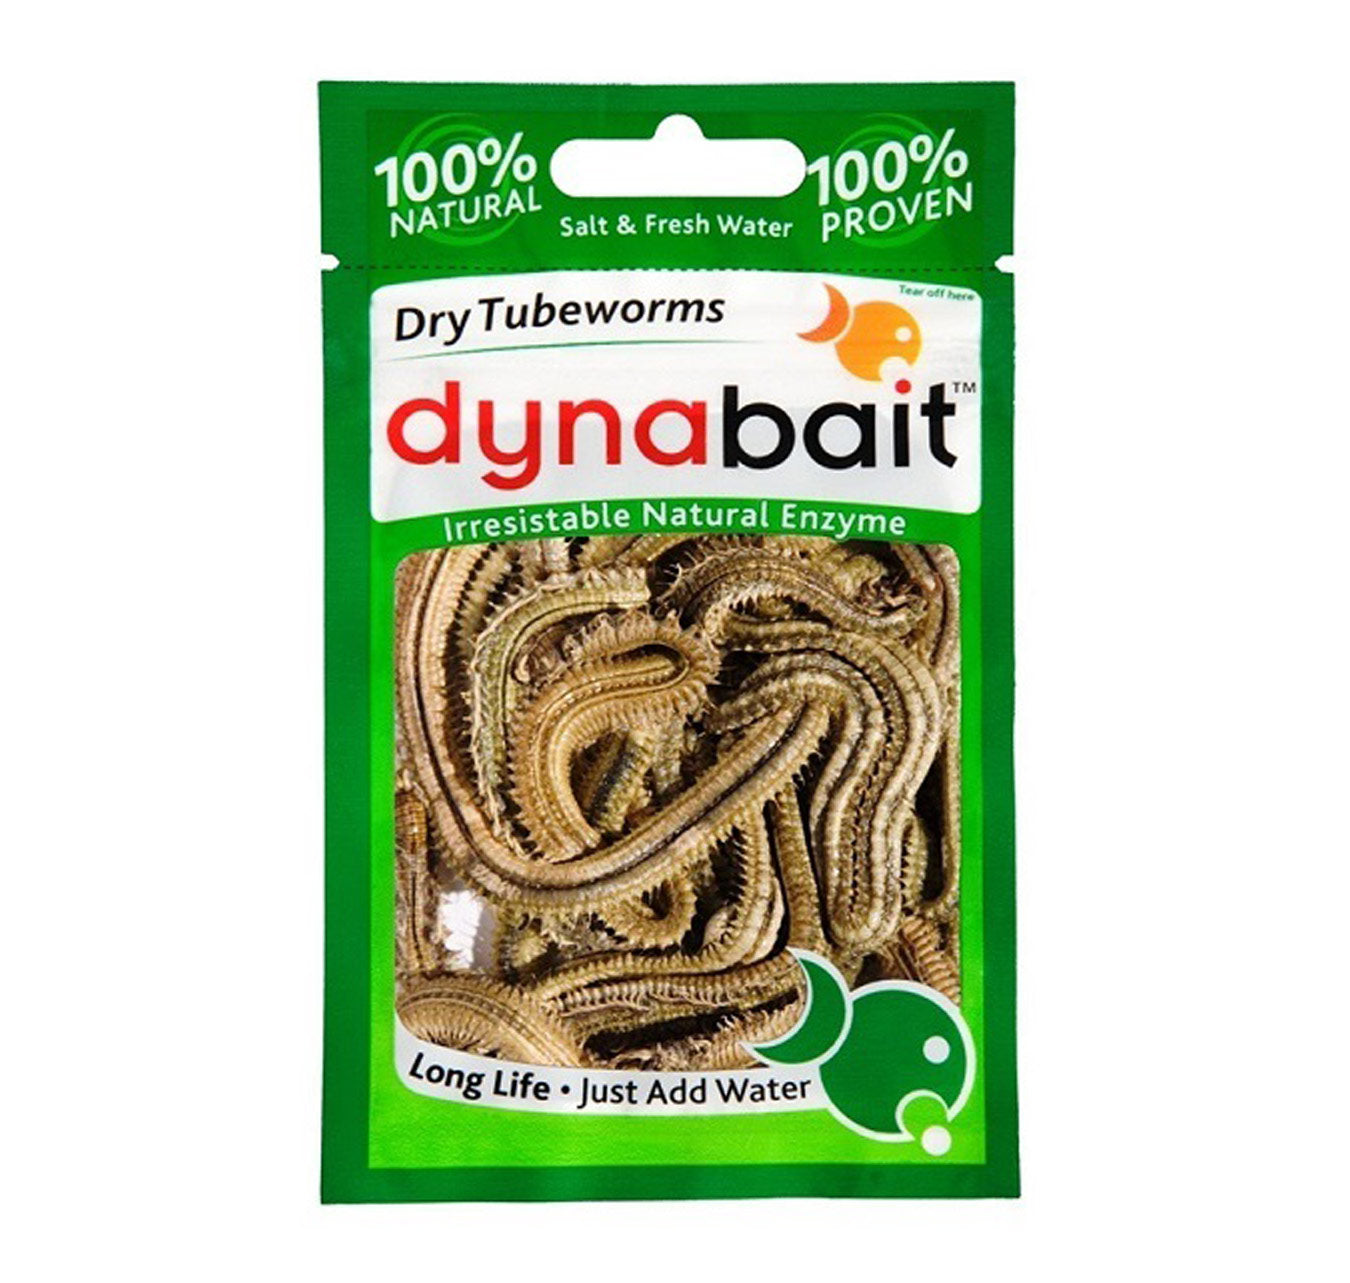 Dynabait Dry Tube Worms